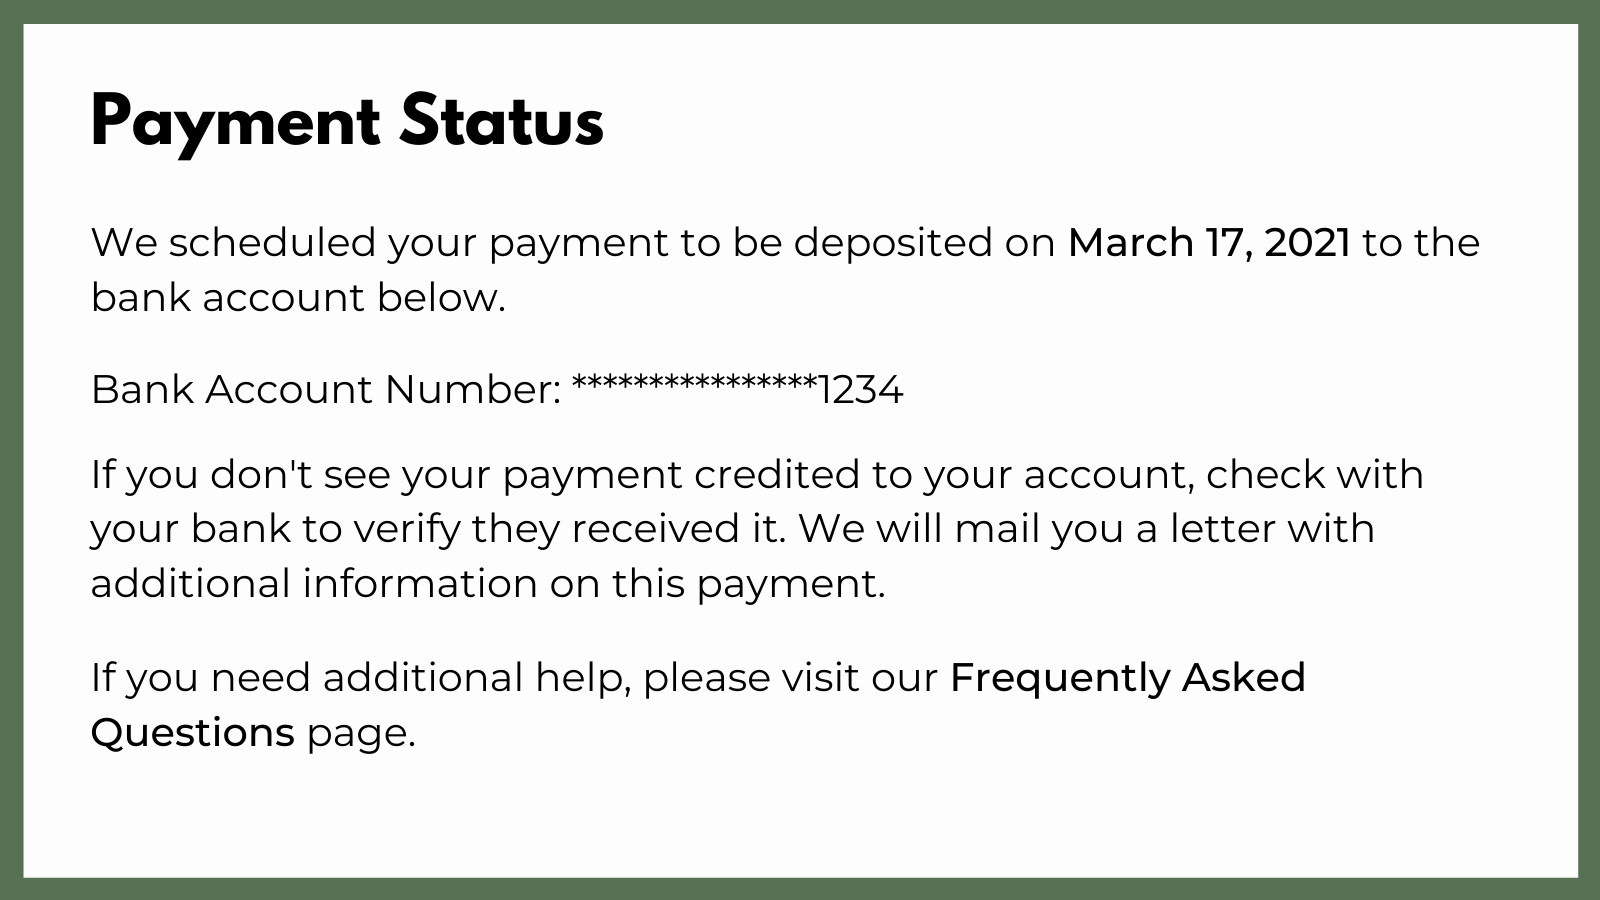 Graphic shows an example of a notification from the IRS regarding the status of your stimulus check. It reads. "Payment Status: We scheduled your payment to be deposited on March 17, 2021 to the bank account below. Bank Account Number: ********1234. If you don't see your payment credited to your account, check with your bank to verify they received it. We will mail you a letter with additional information this payment. If you need additional help, please visit our Frequently Asked Questions Page."